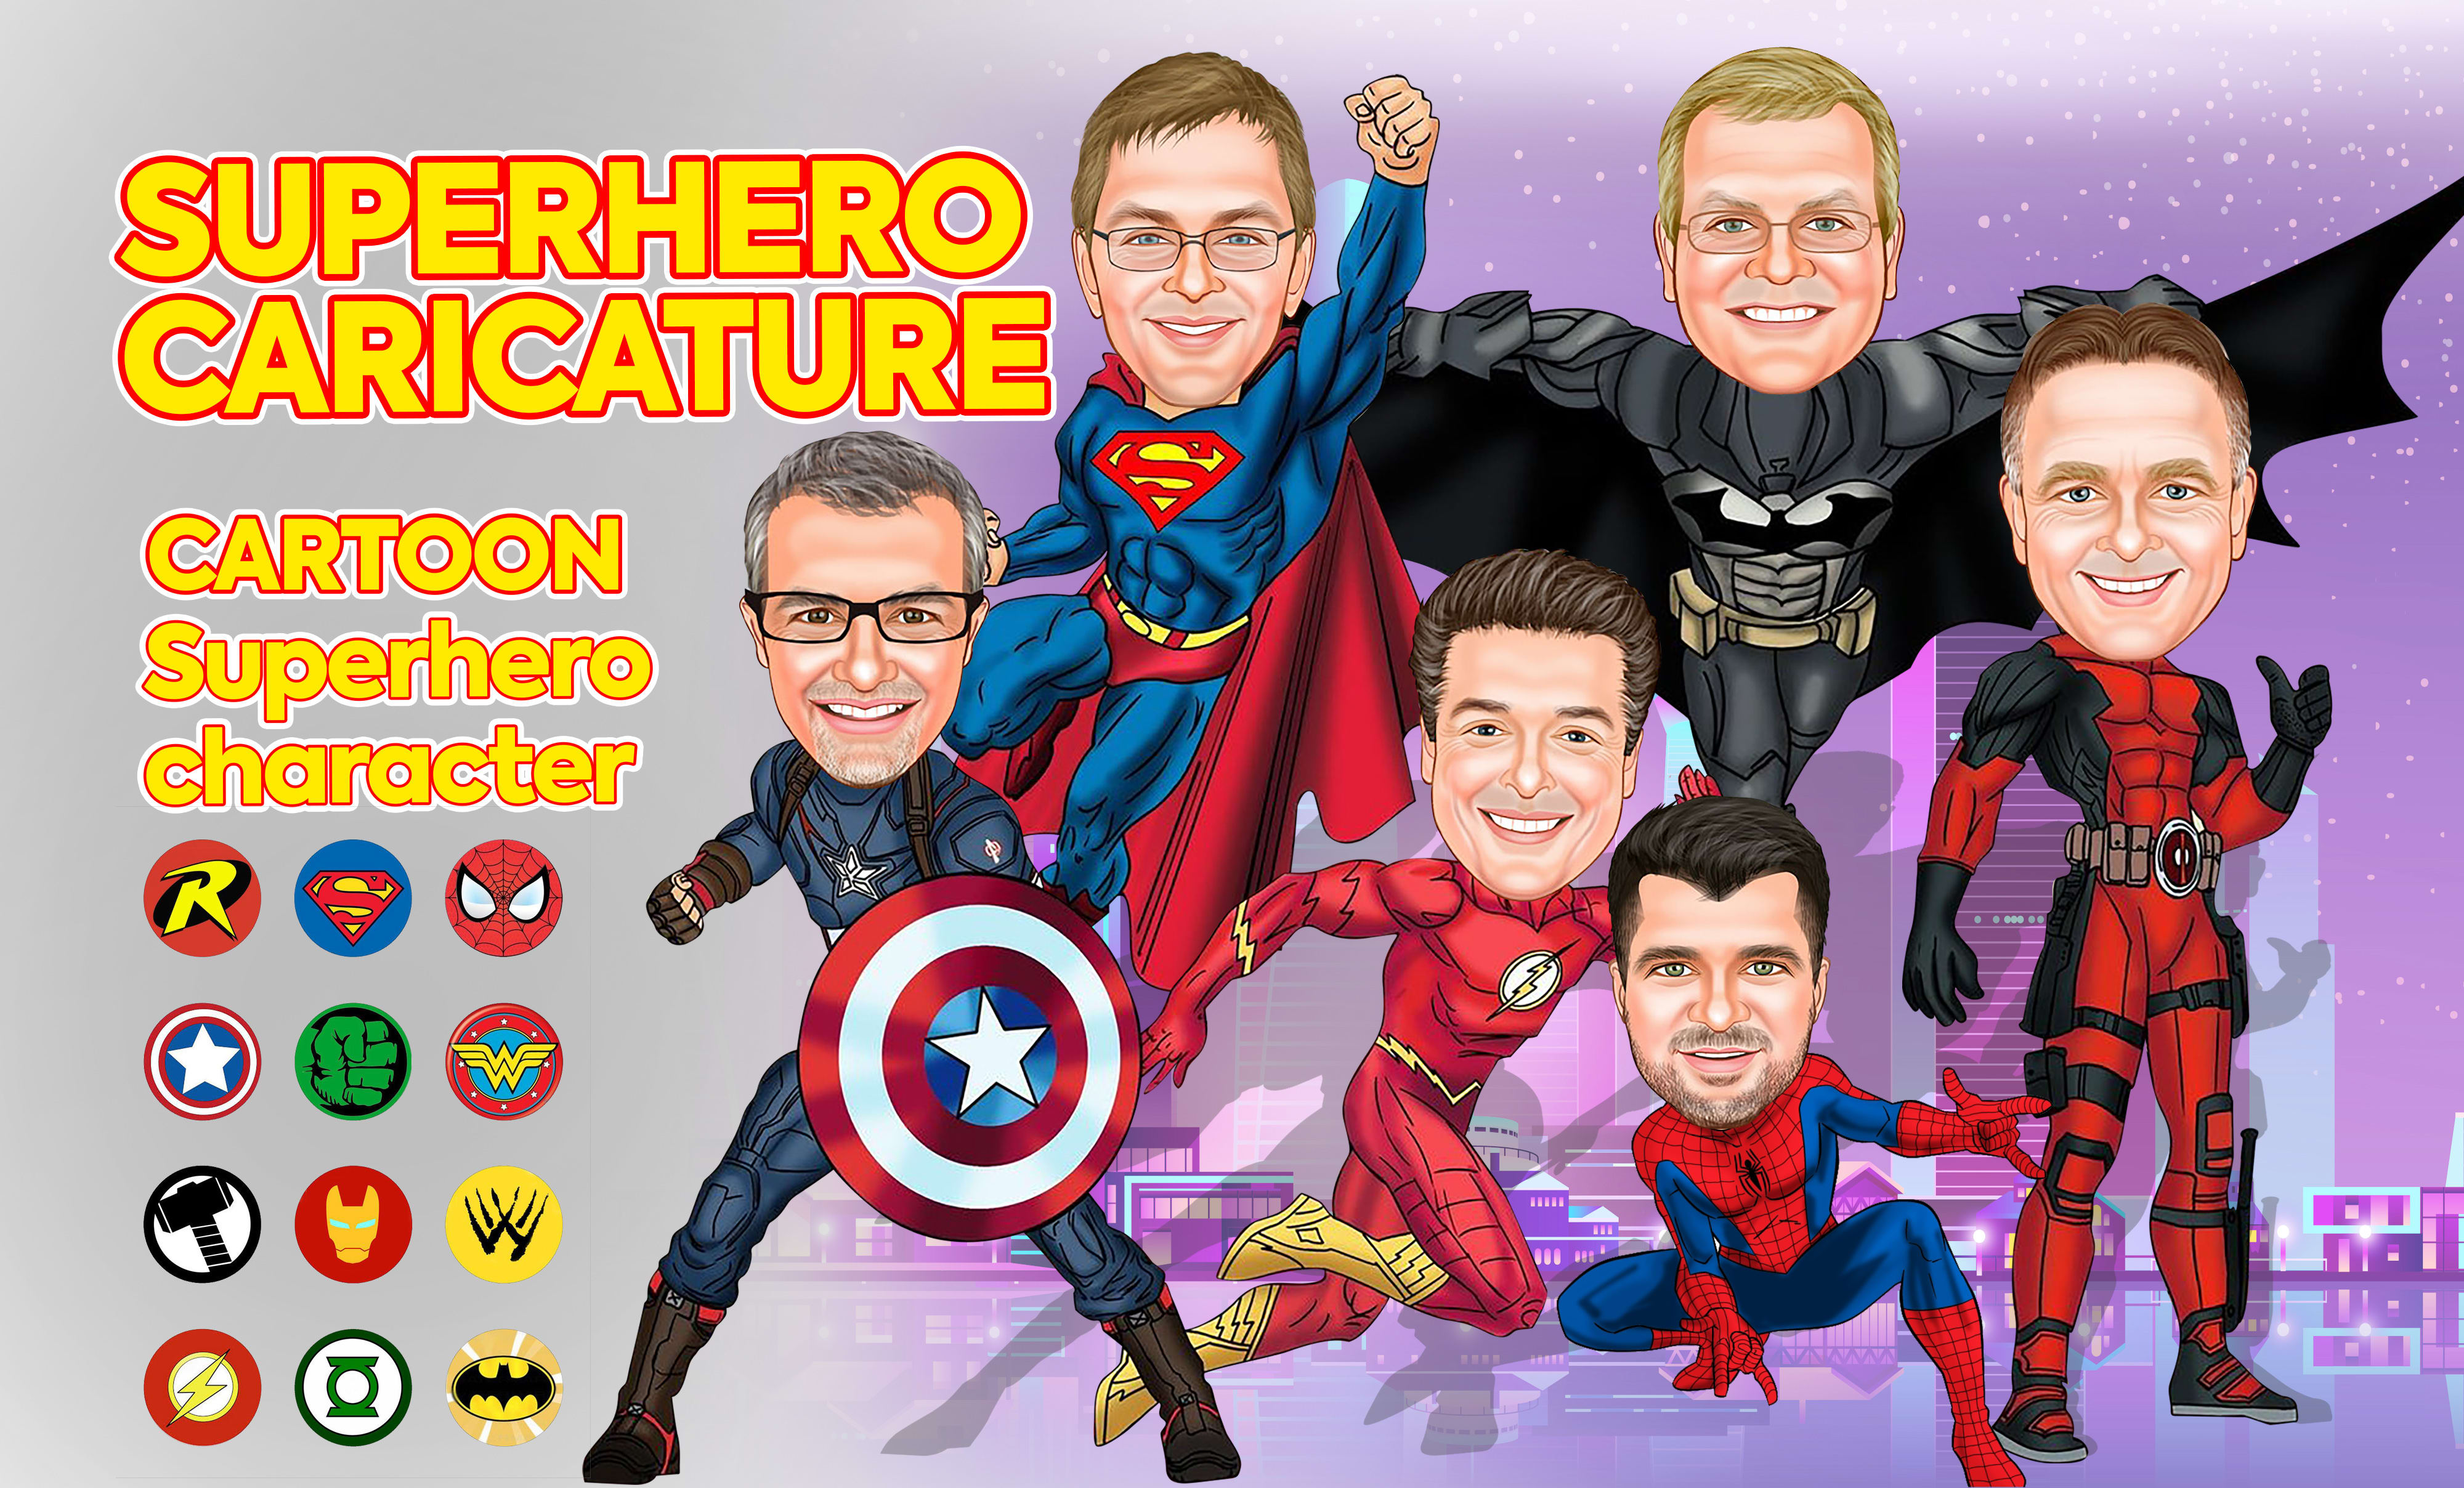 Draw a digital superhero caricature or family caricature by Propixel100 |  Fiverr